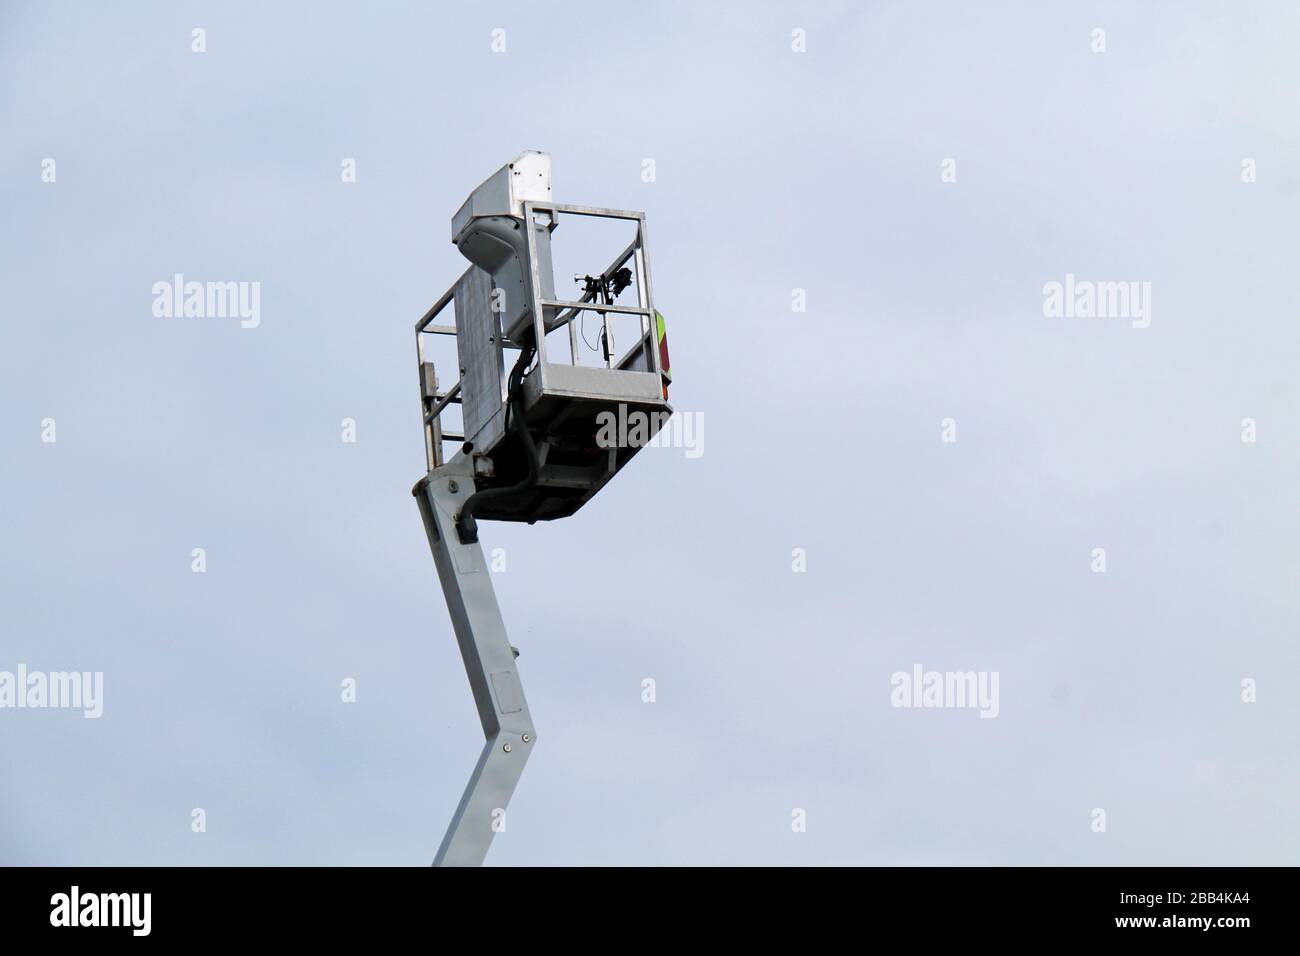 The Cage at the Top of a High Lift Cherry Picker Crane. Stock Photo